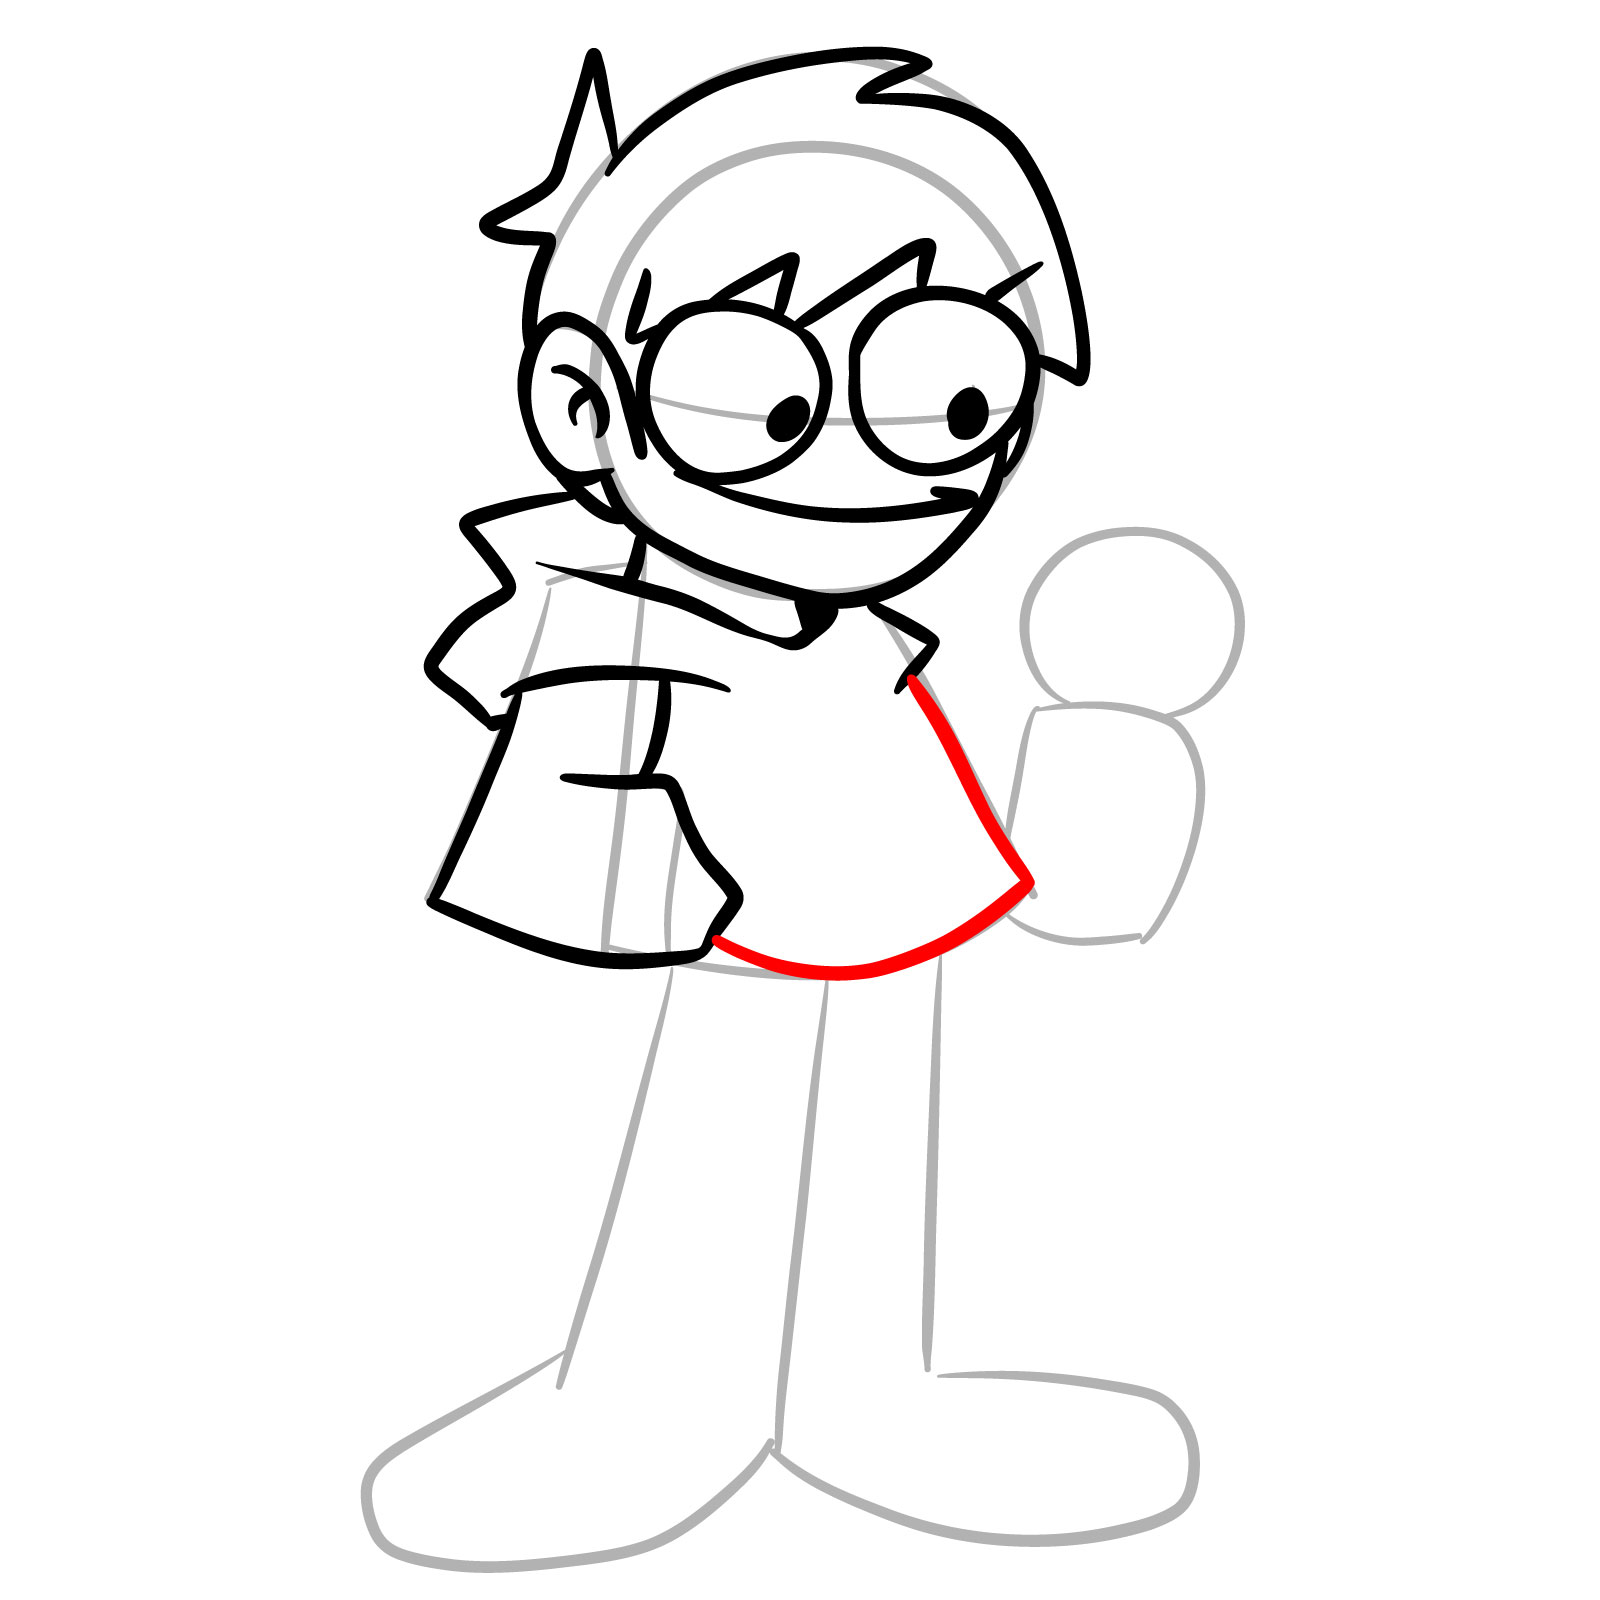 How to draw Edd from Online Vs - step 15